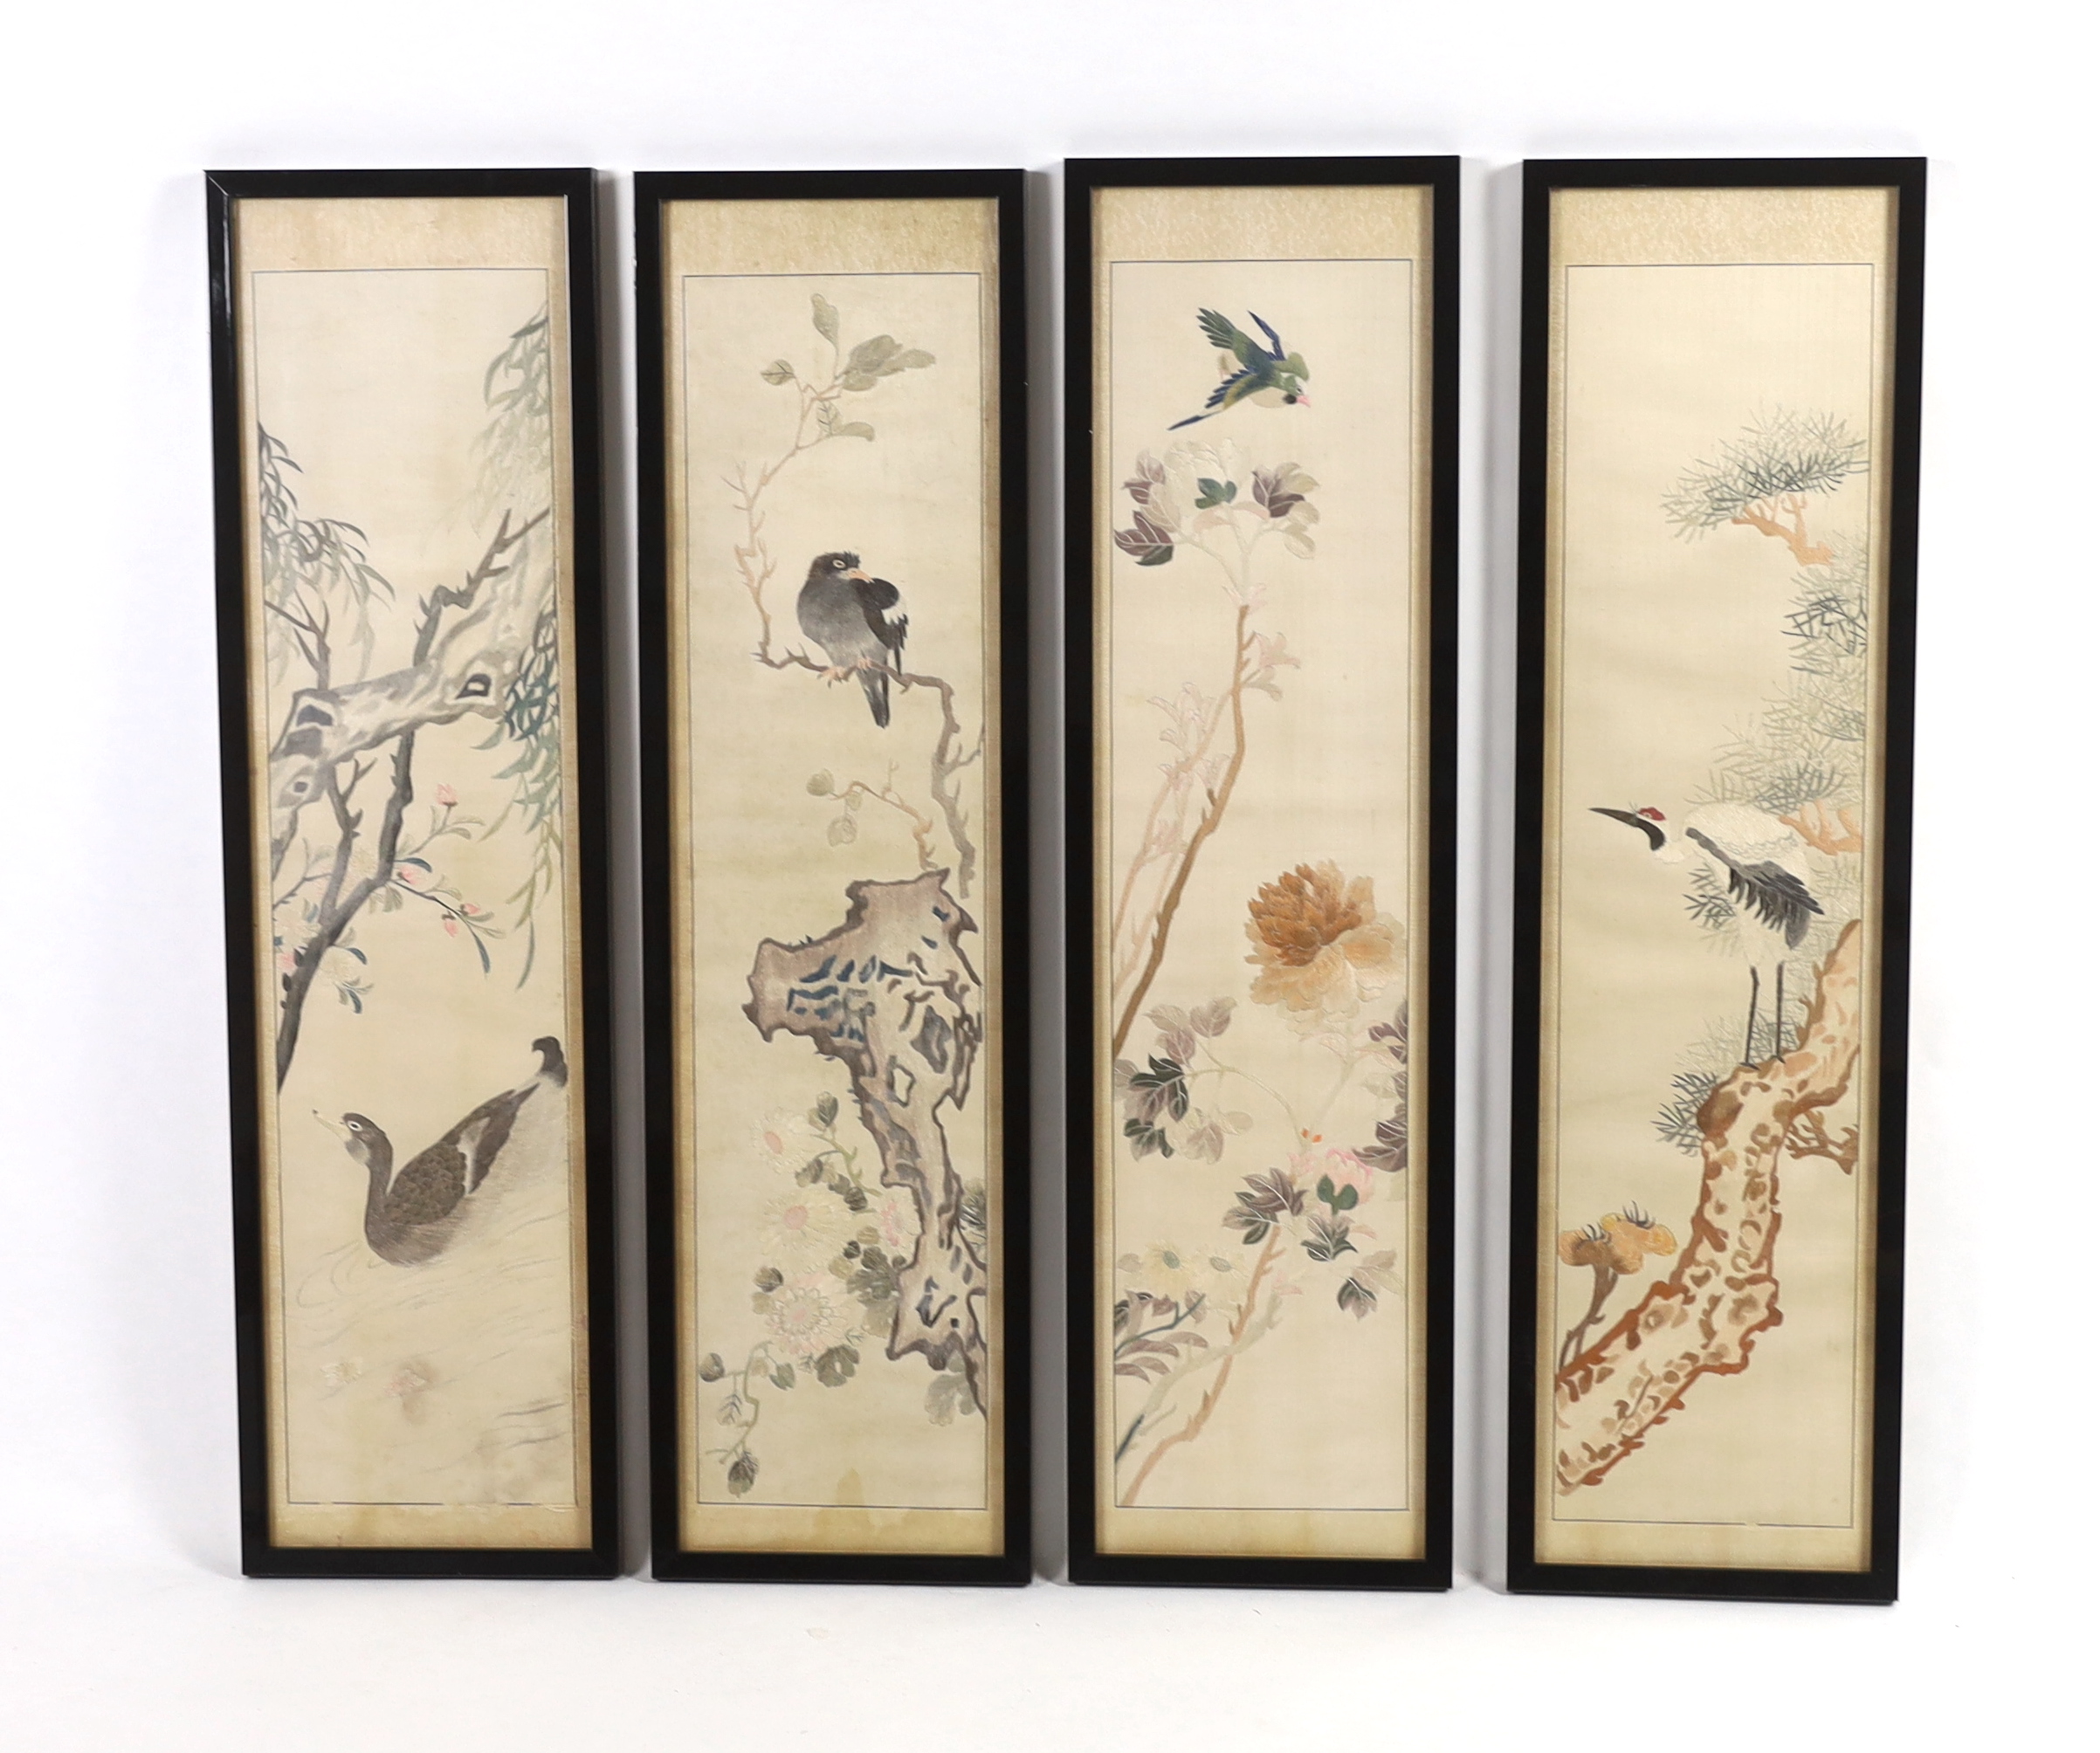 A set of four framed Chinese silk embroideries, of “The Four Seasons”, late Qing dynasty, embroidered with birds and trees and flowers, 96cm high x 22cm wide